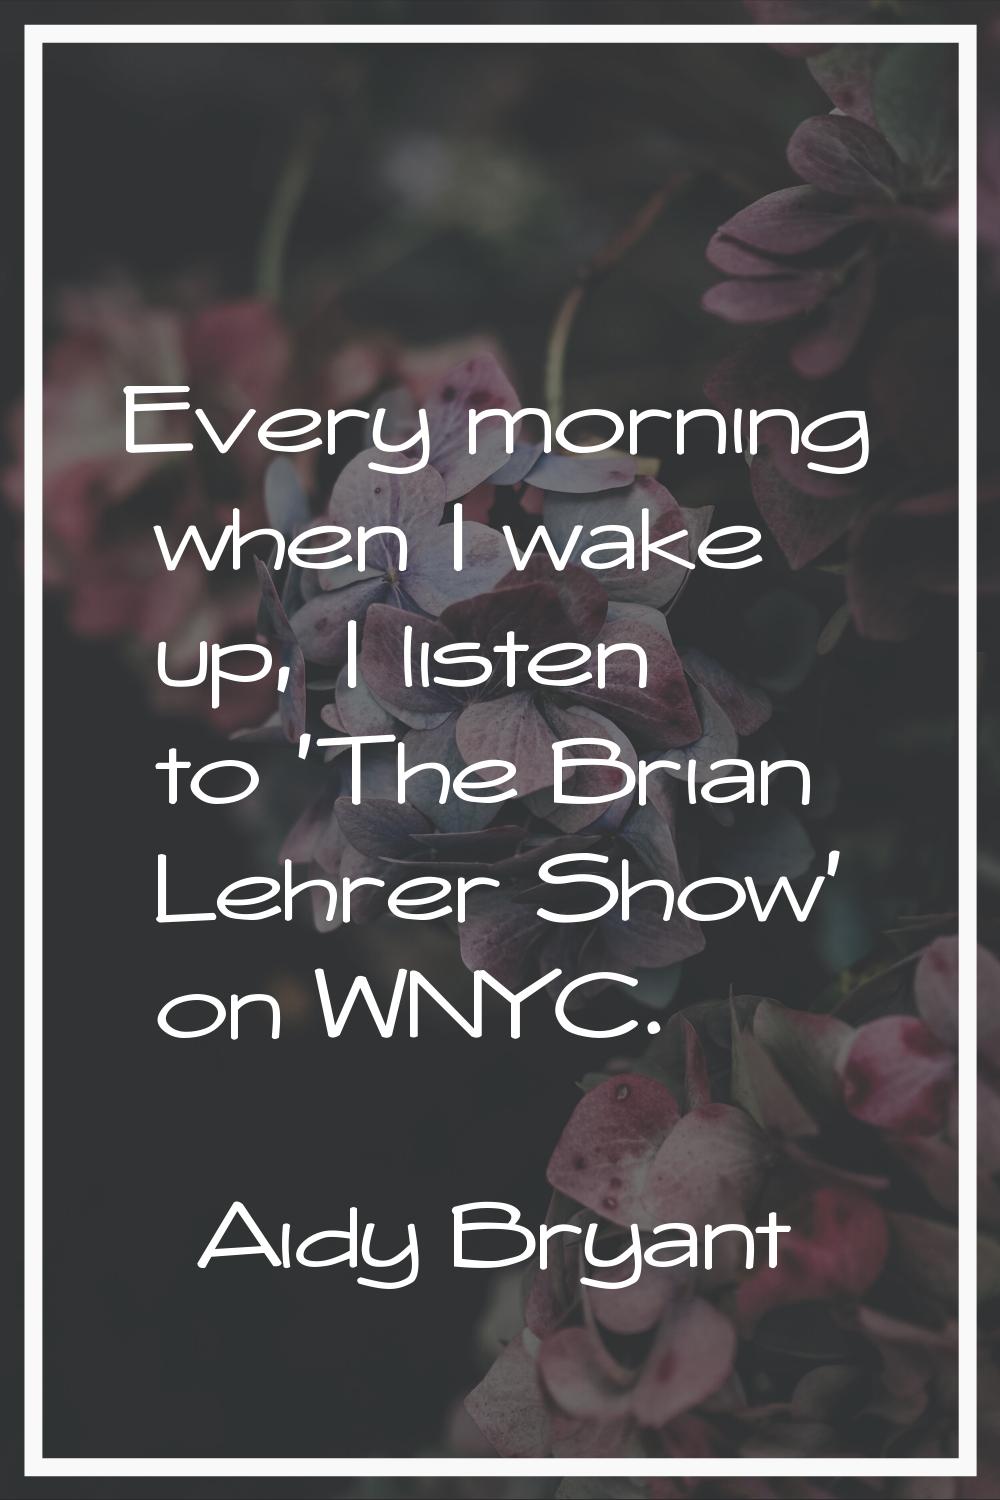 Every morning when I wake up, I listen to 'The Brian Lehrer Show' on WNYC.